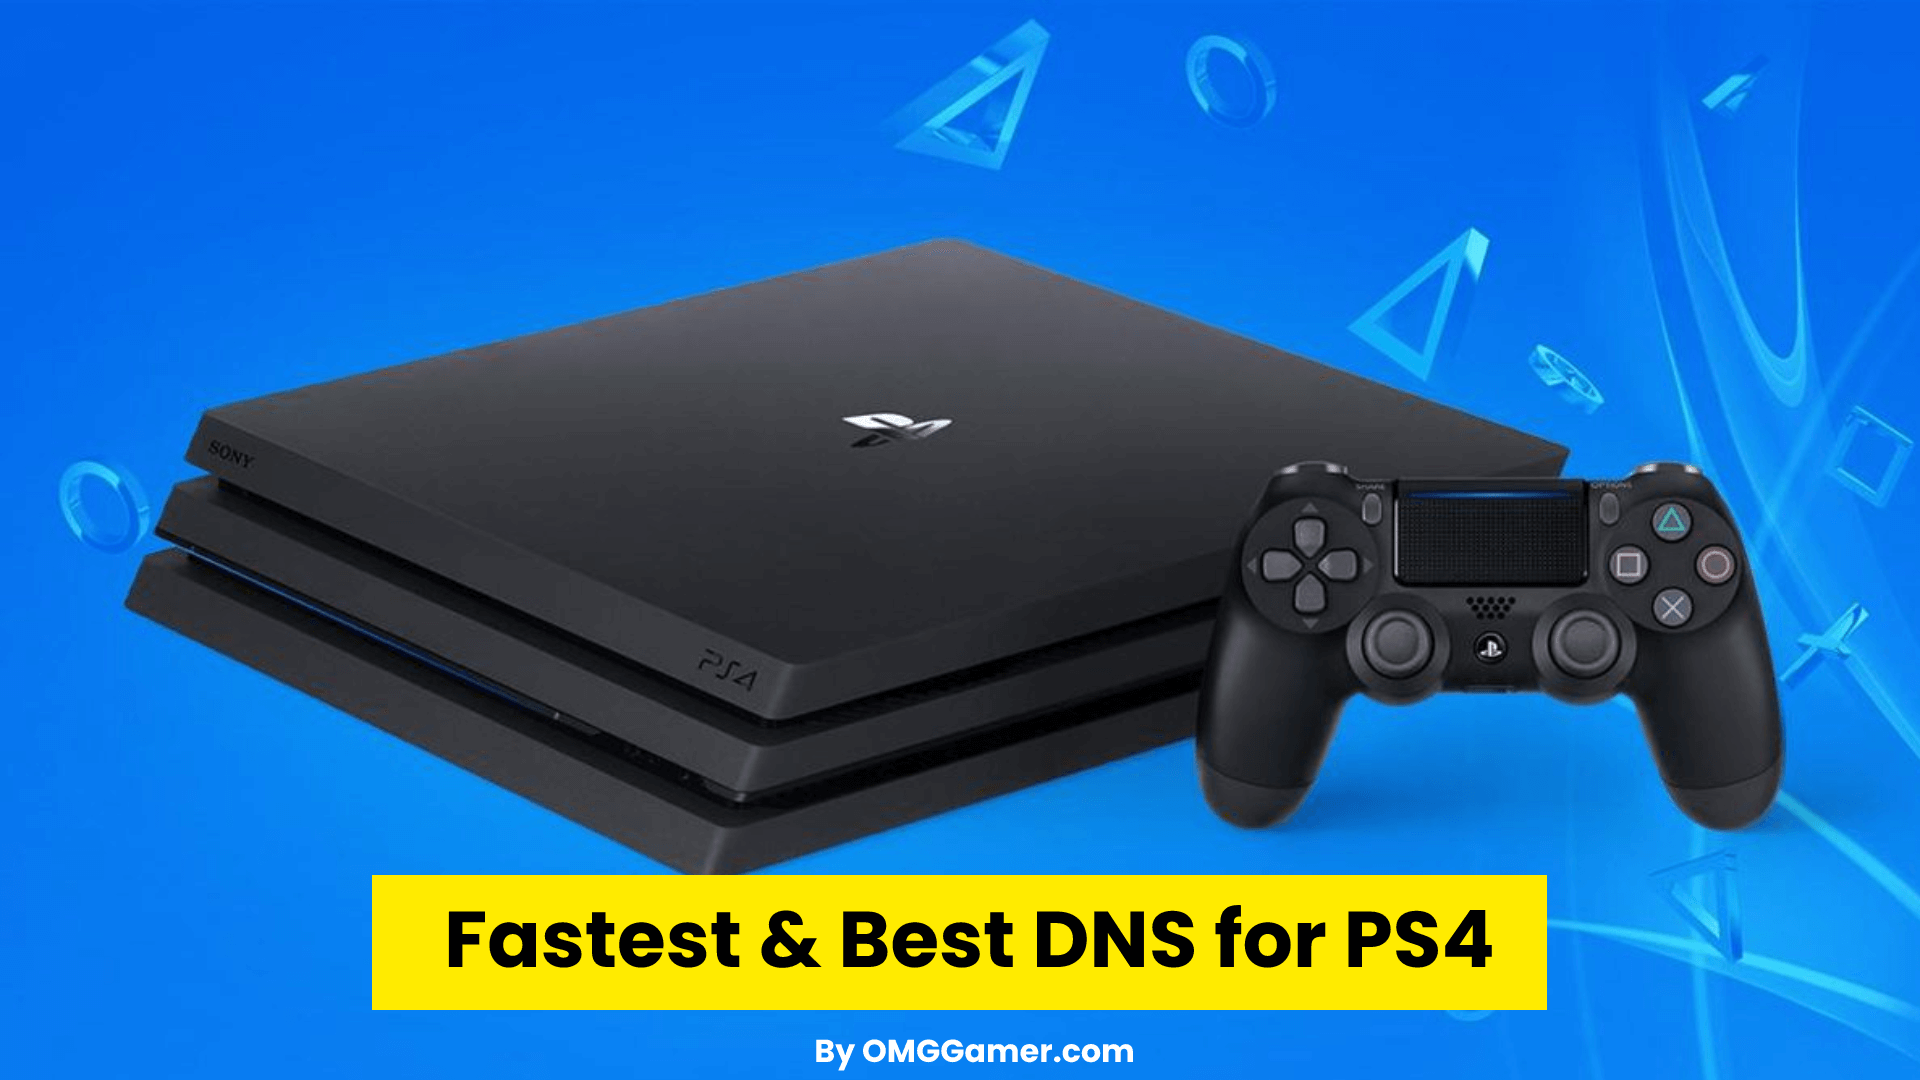 Fastest & Best DNS for PS4